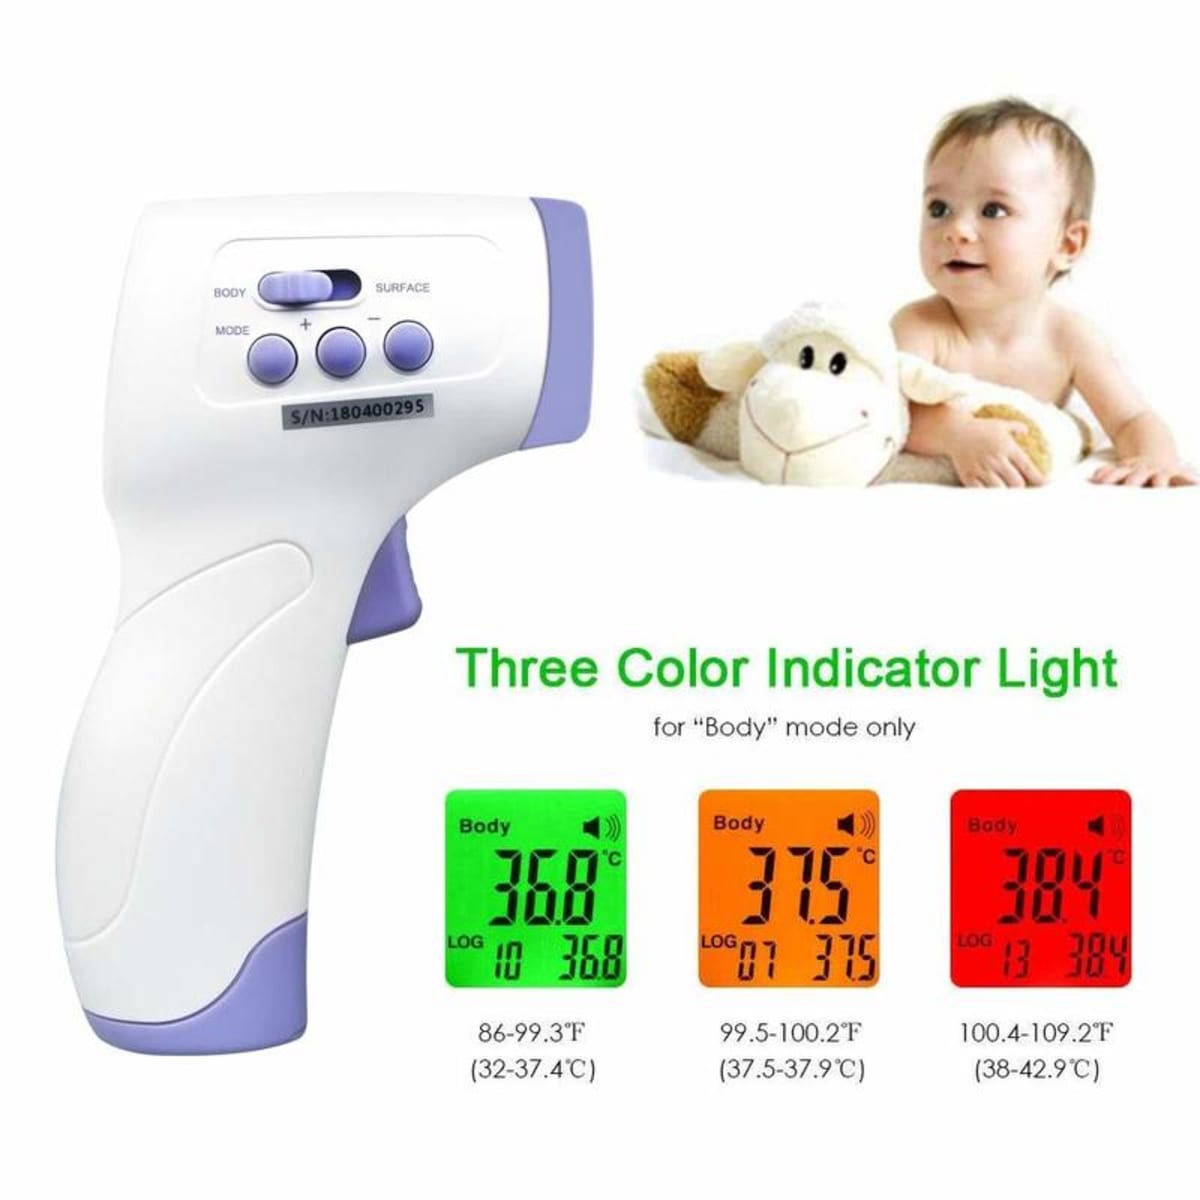 Quick Scan Instant Readout Contactless Thermometer Gun by IndigiÂ® - Fever  Indicator w/ LED Color Readout